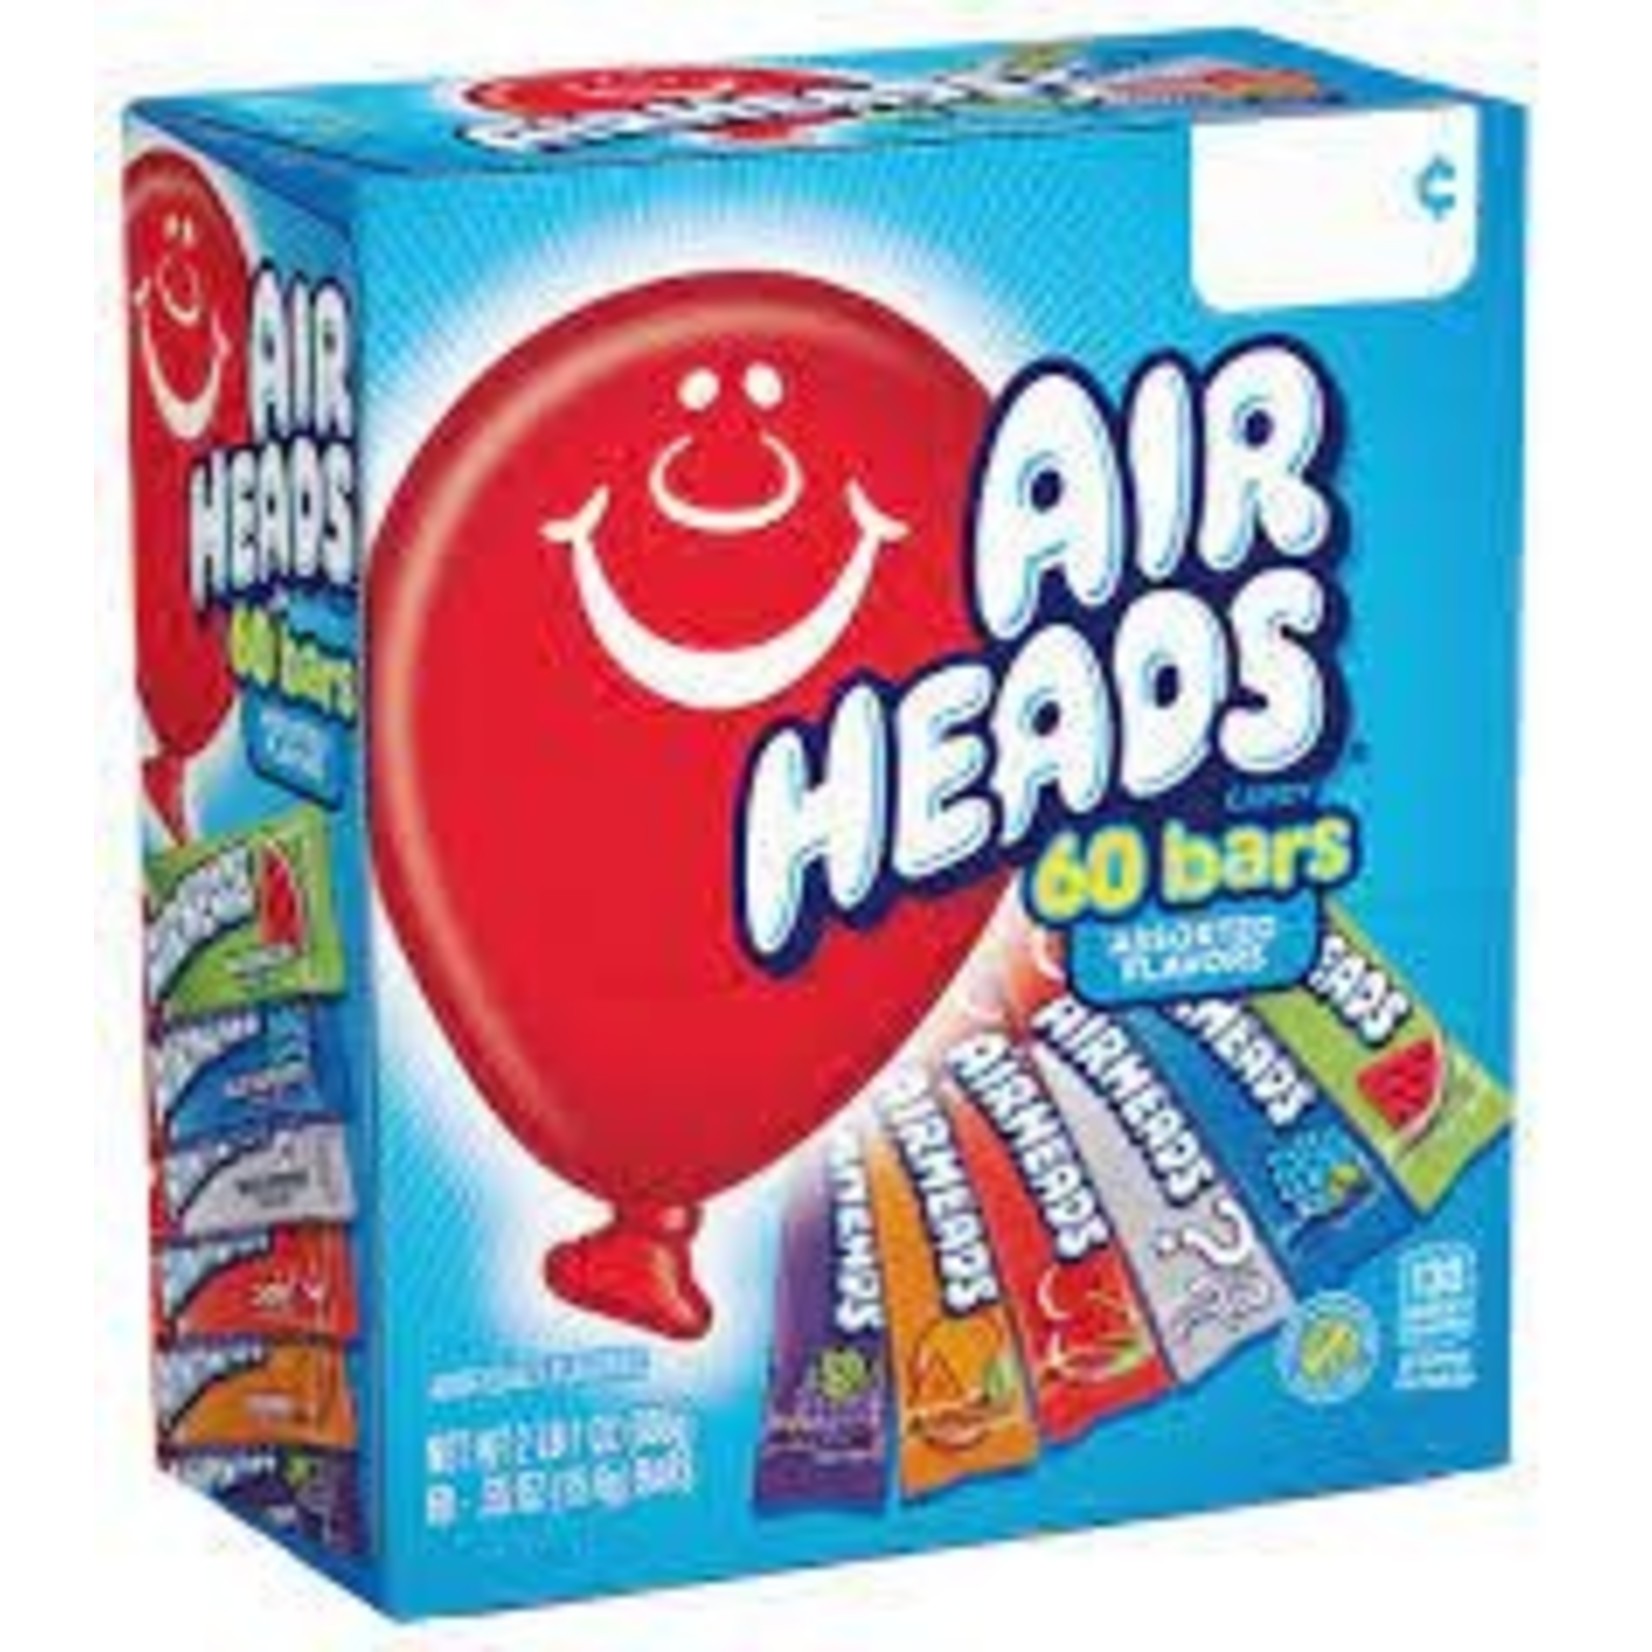 Airhead Assorted Bars 60ct.